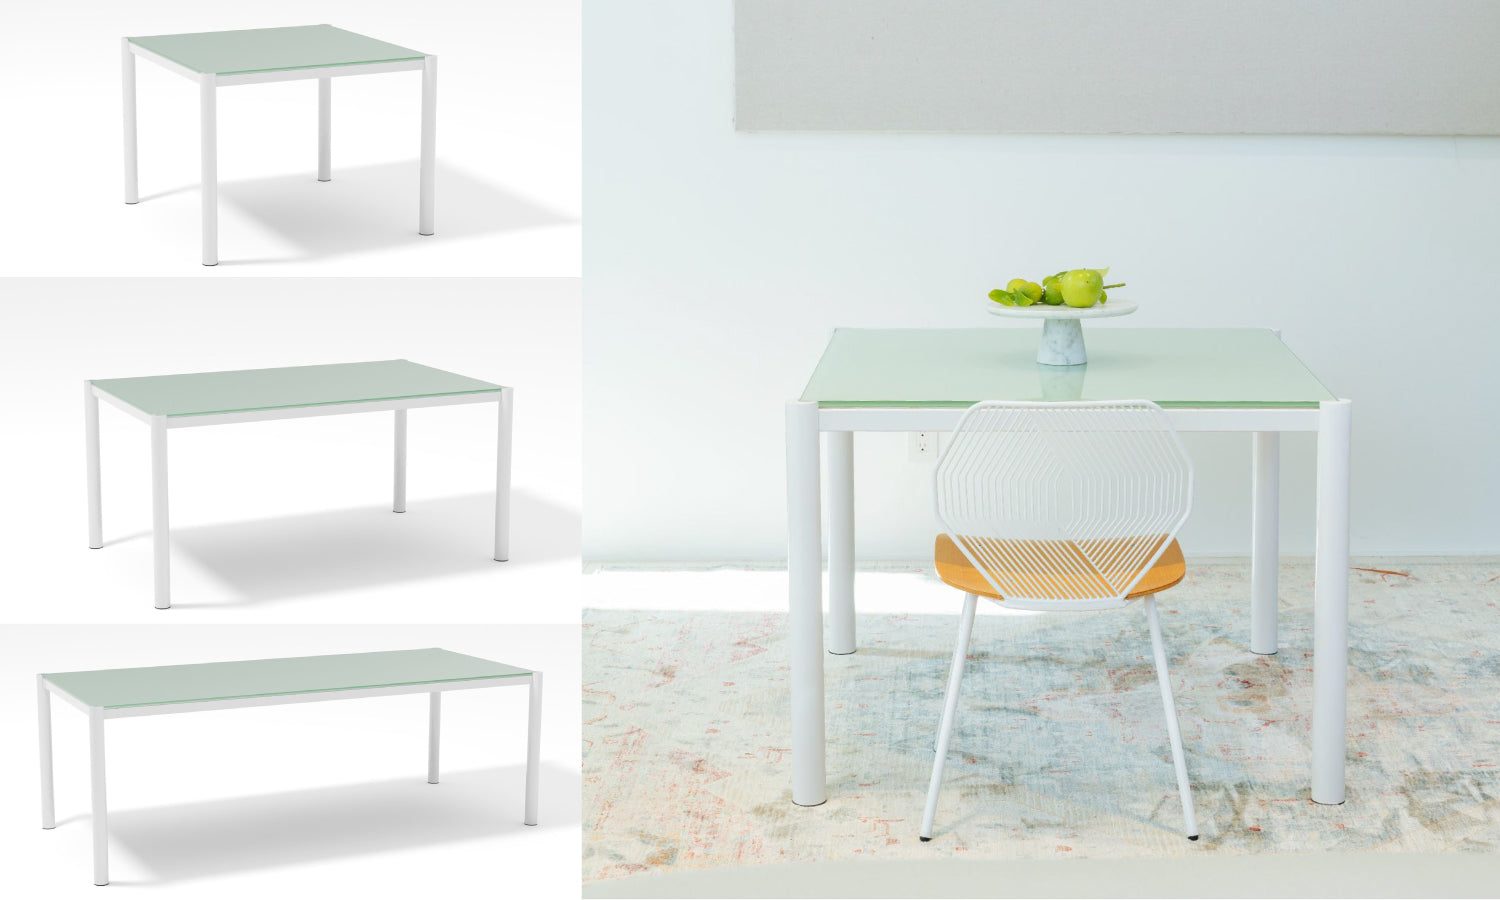 The Get-Together Table in White with a Tempered Glass Top. Modern minimalistic design with a glass top that channels into the top of the legs for a flush and clean finish. 